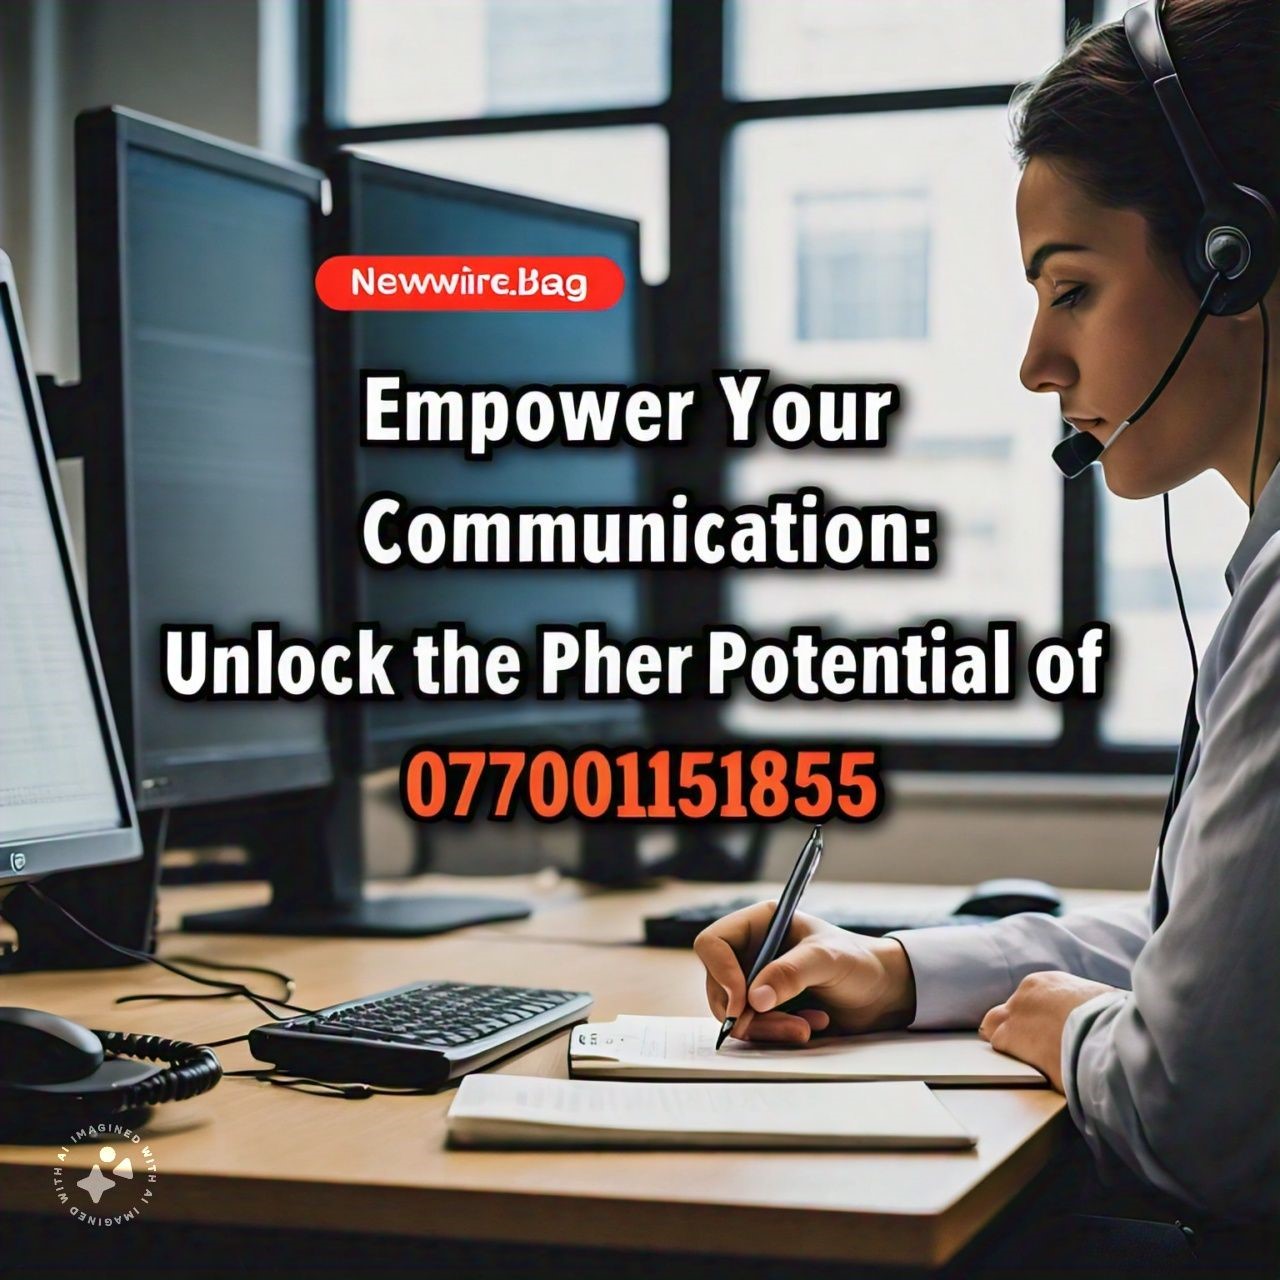 Empower Your Communication: Unlock the Potential of 07700151855